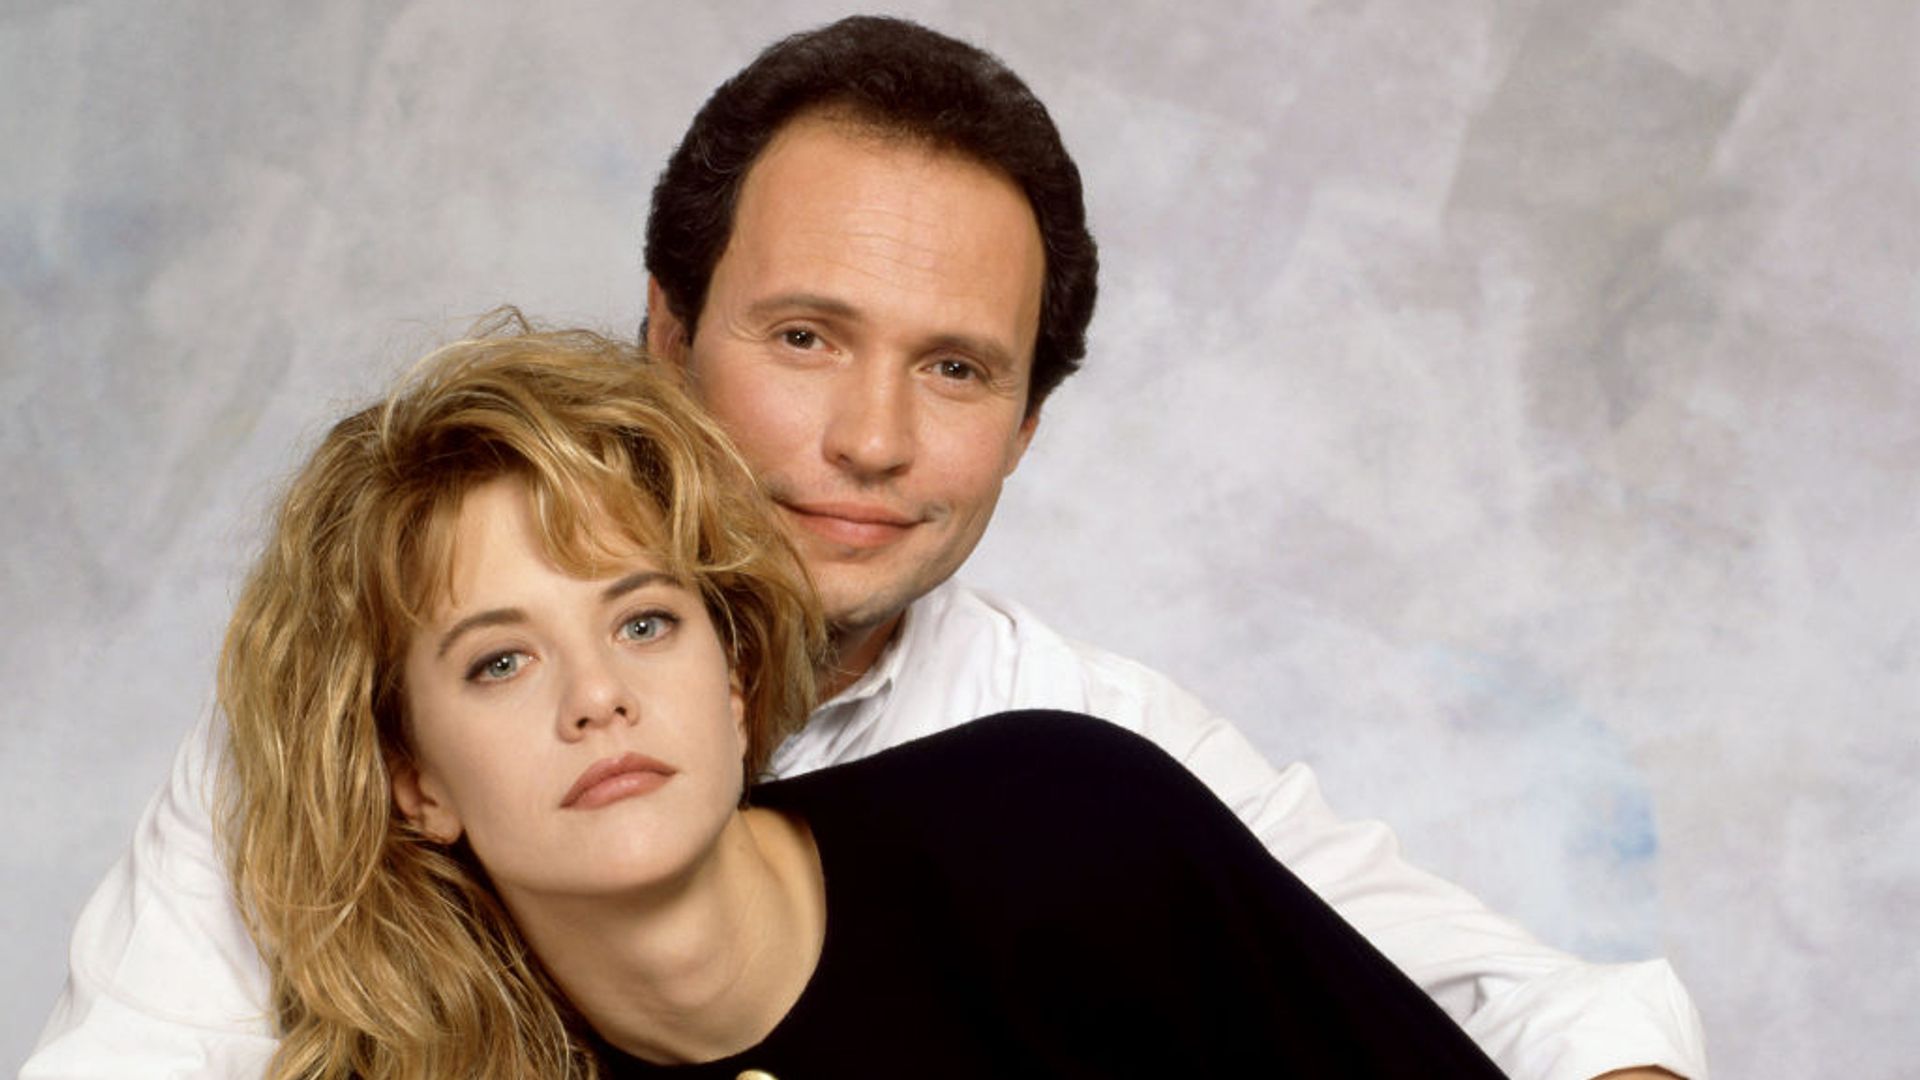 Meg Ryan cuddled up to Billy Crystal in a promotional photo for When Harry Met Sally